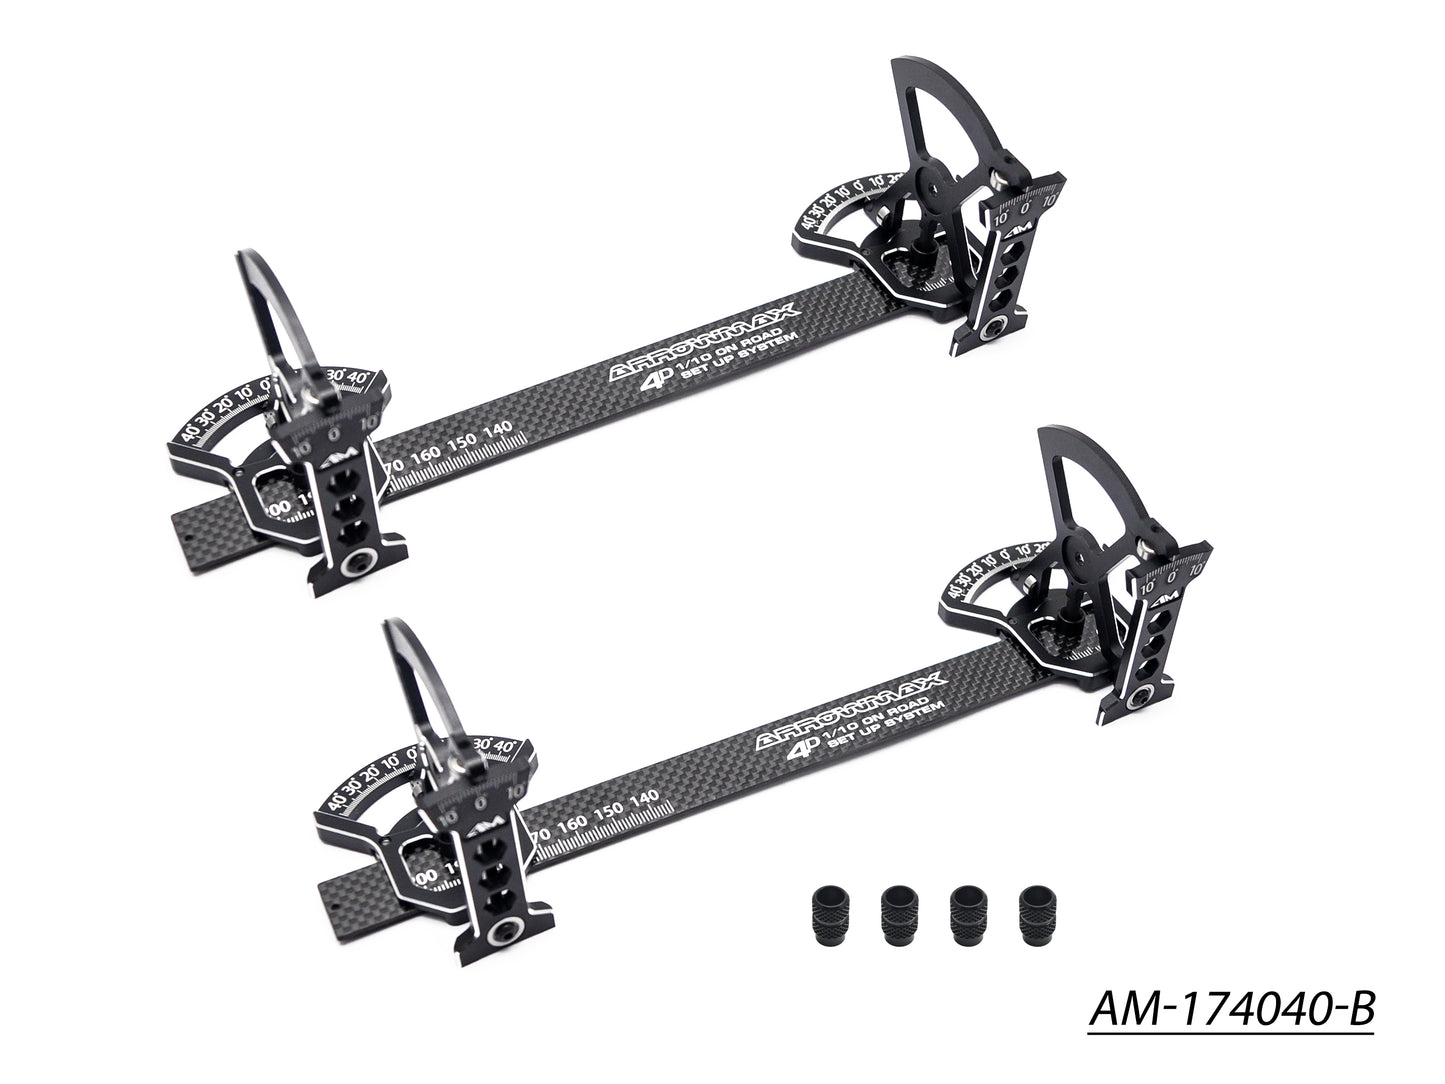 Arrowmax 4D Set-up system for 1/10 on-road (AM-174040-A & AM-174040-B)